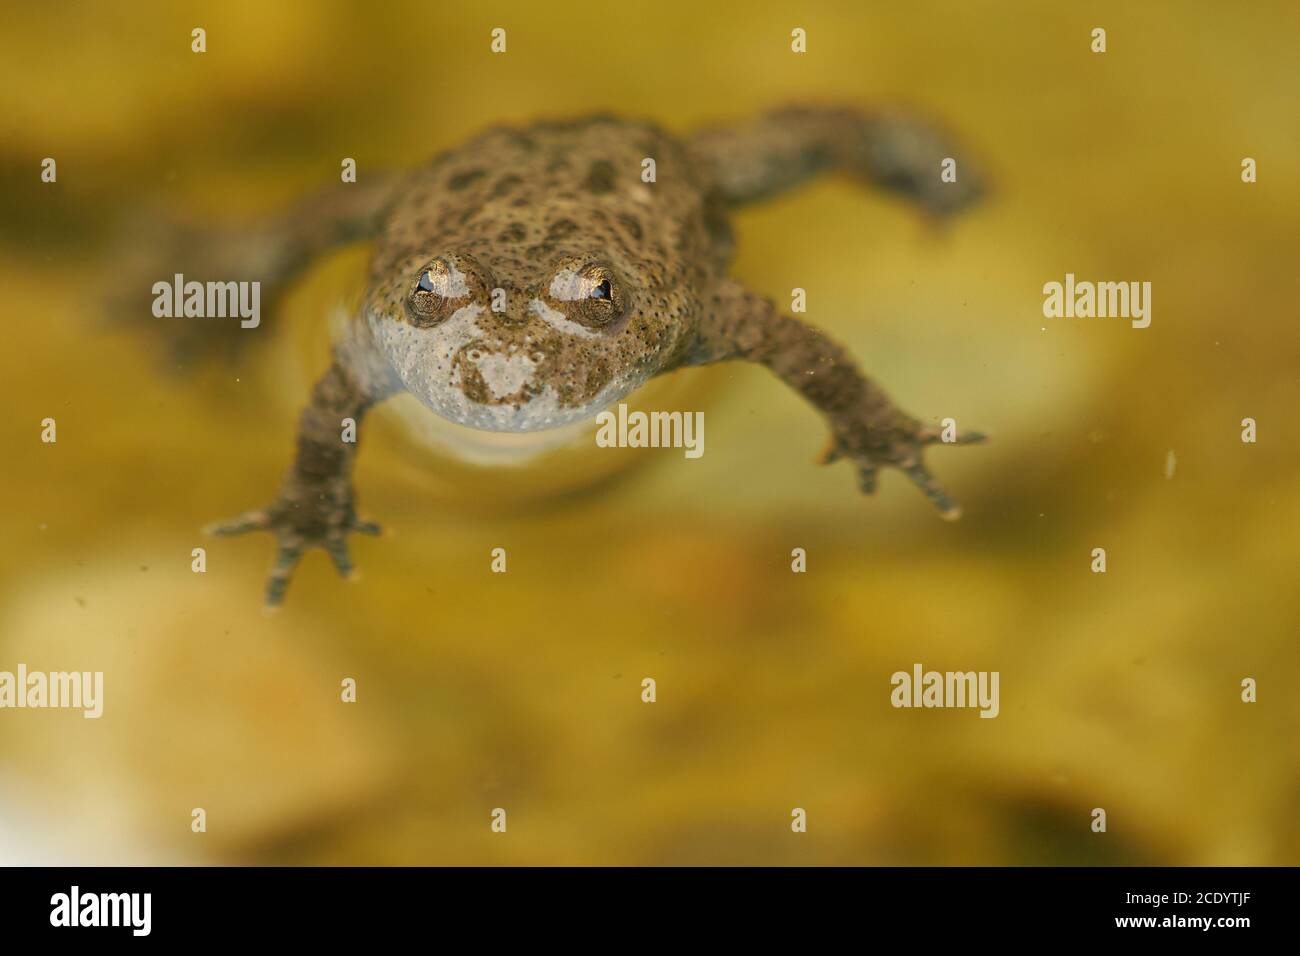 Yellow Bellied Toad Bombina Variegata Portrait Golden Eyes with Black Heart Stock Photo